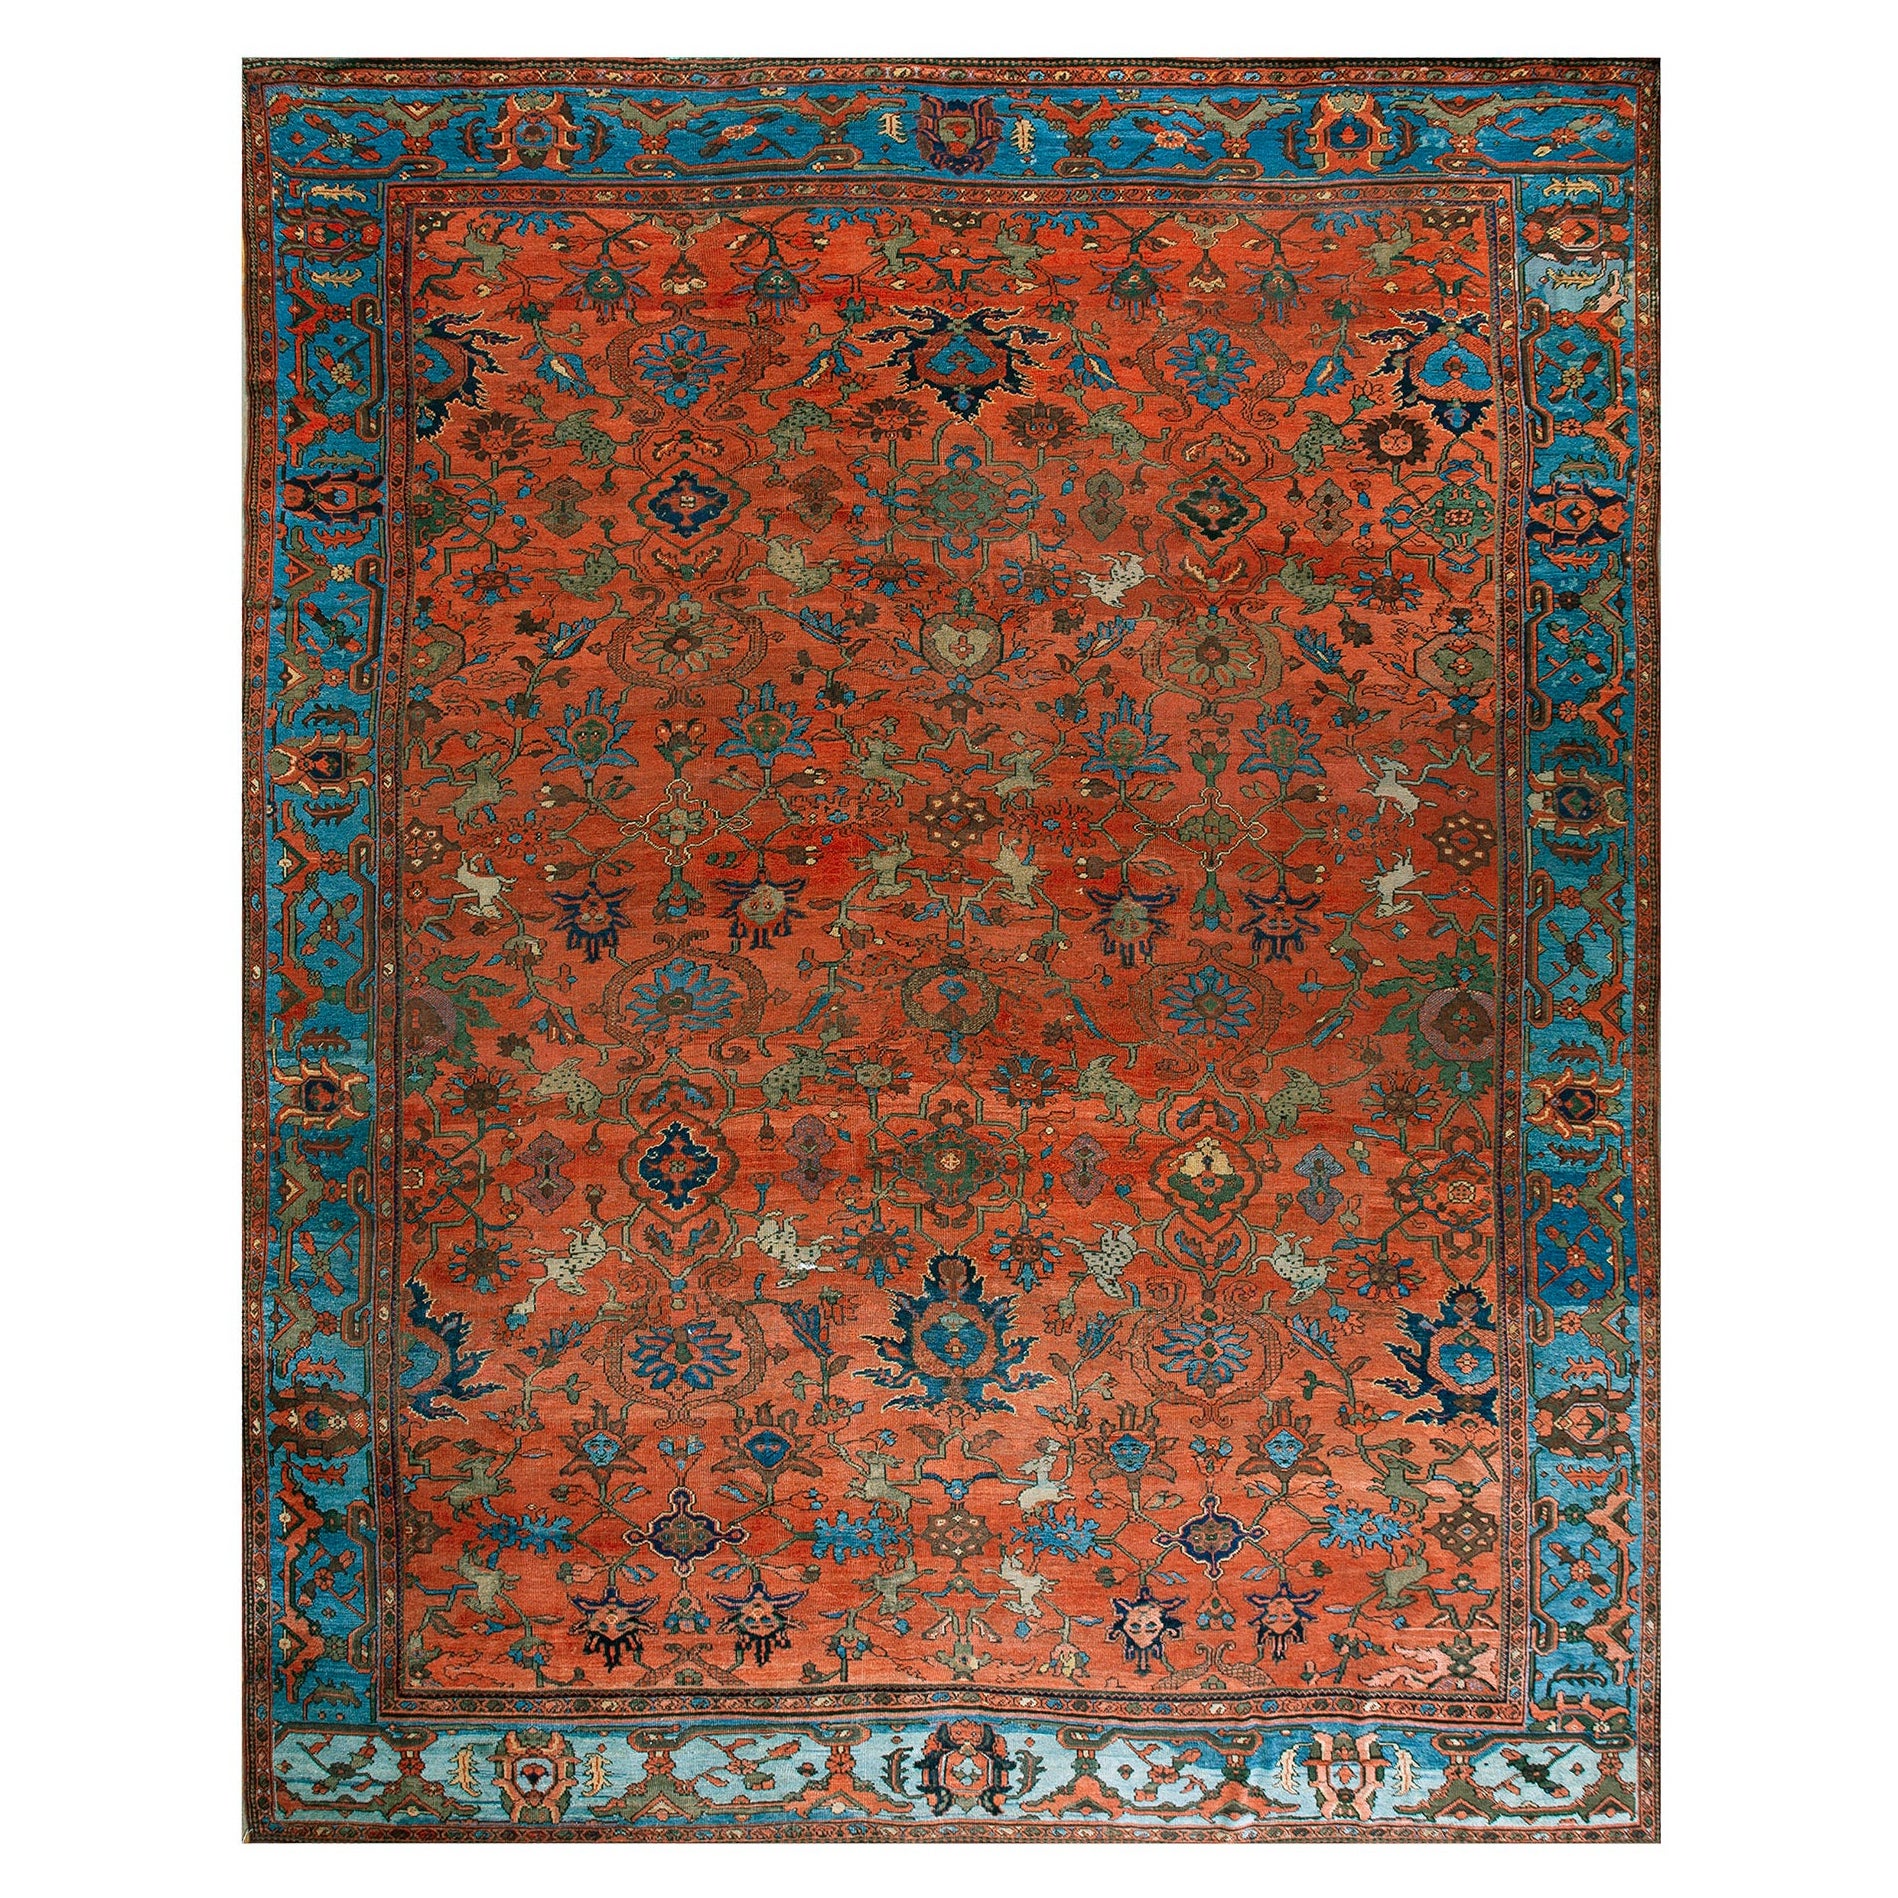 Late 19th Century Persian Sultanabad Carpet ( 12'5" x 15'9" - 378 x 480 cm ) 